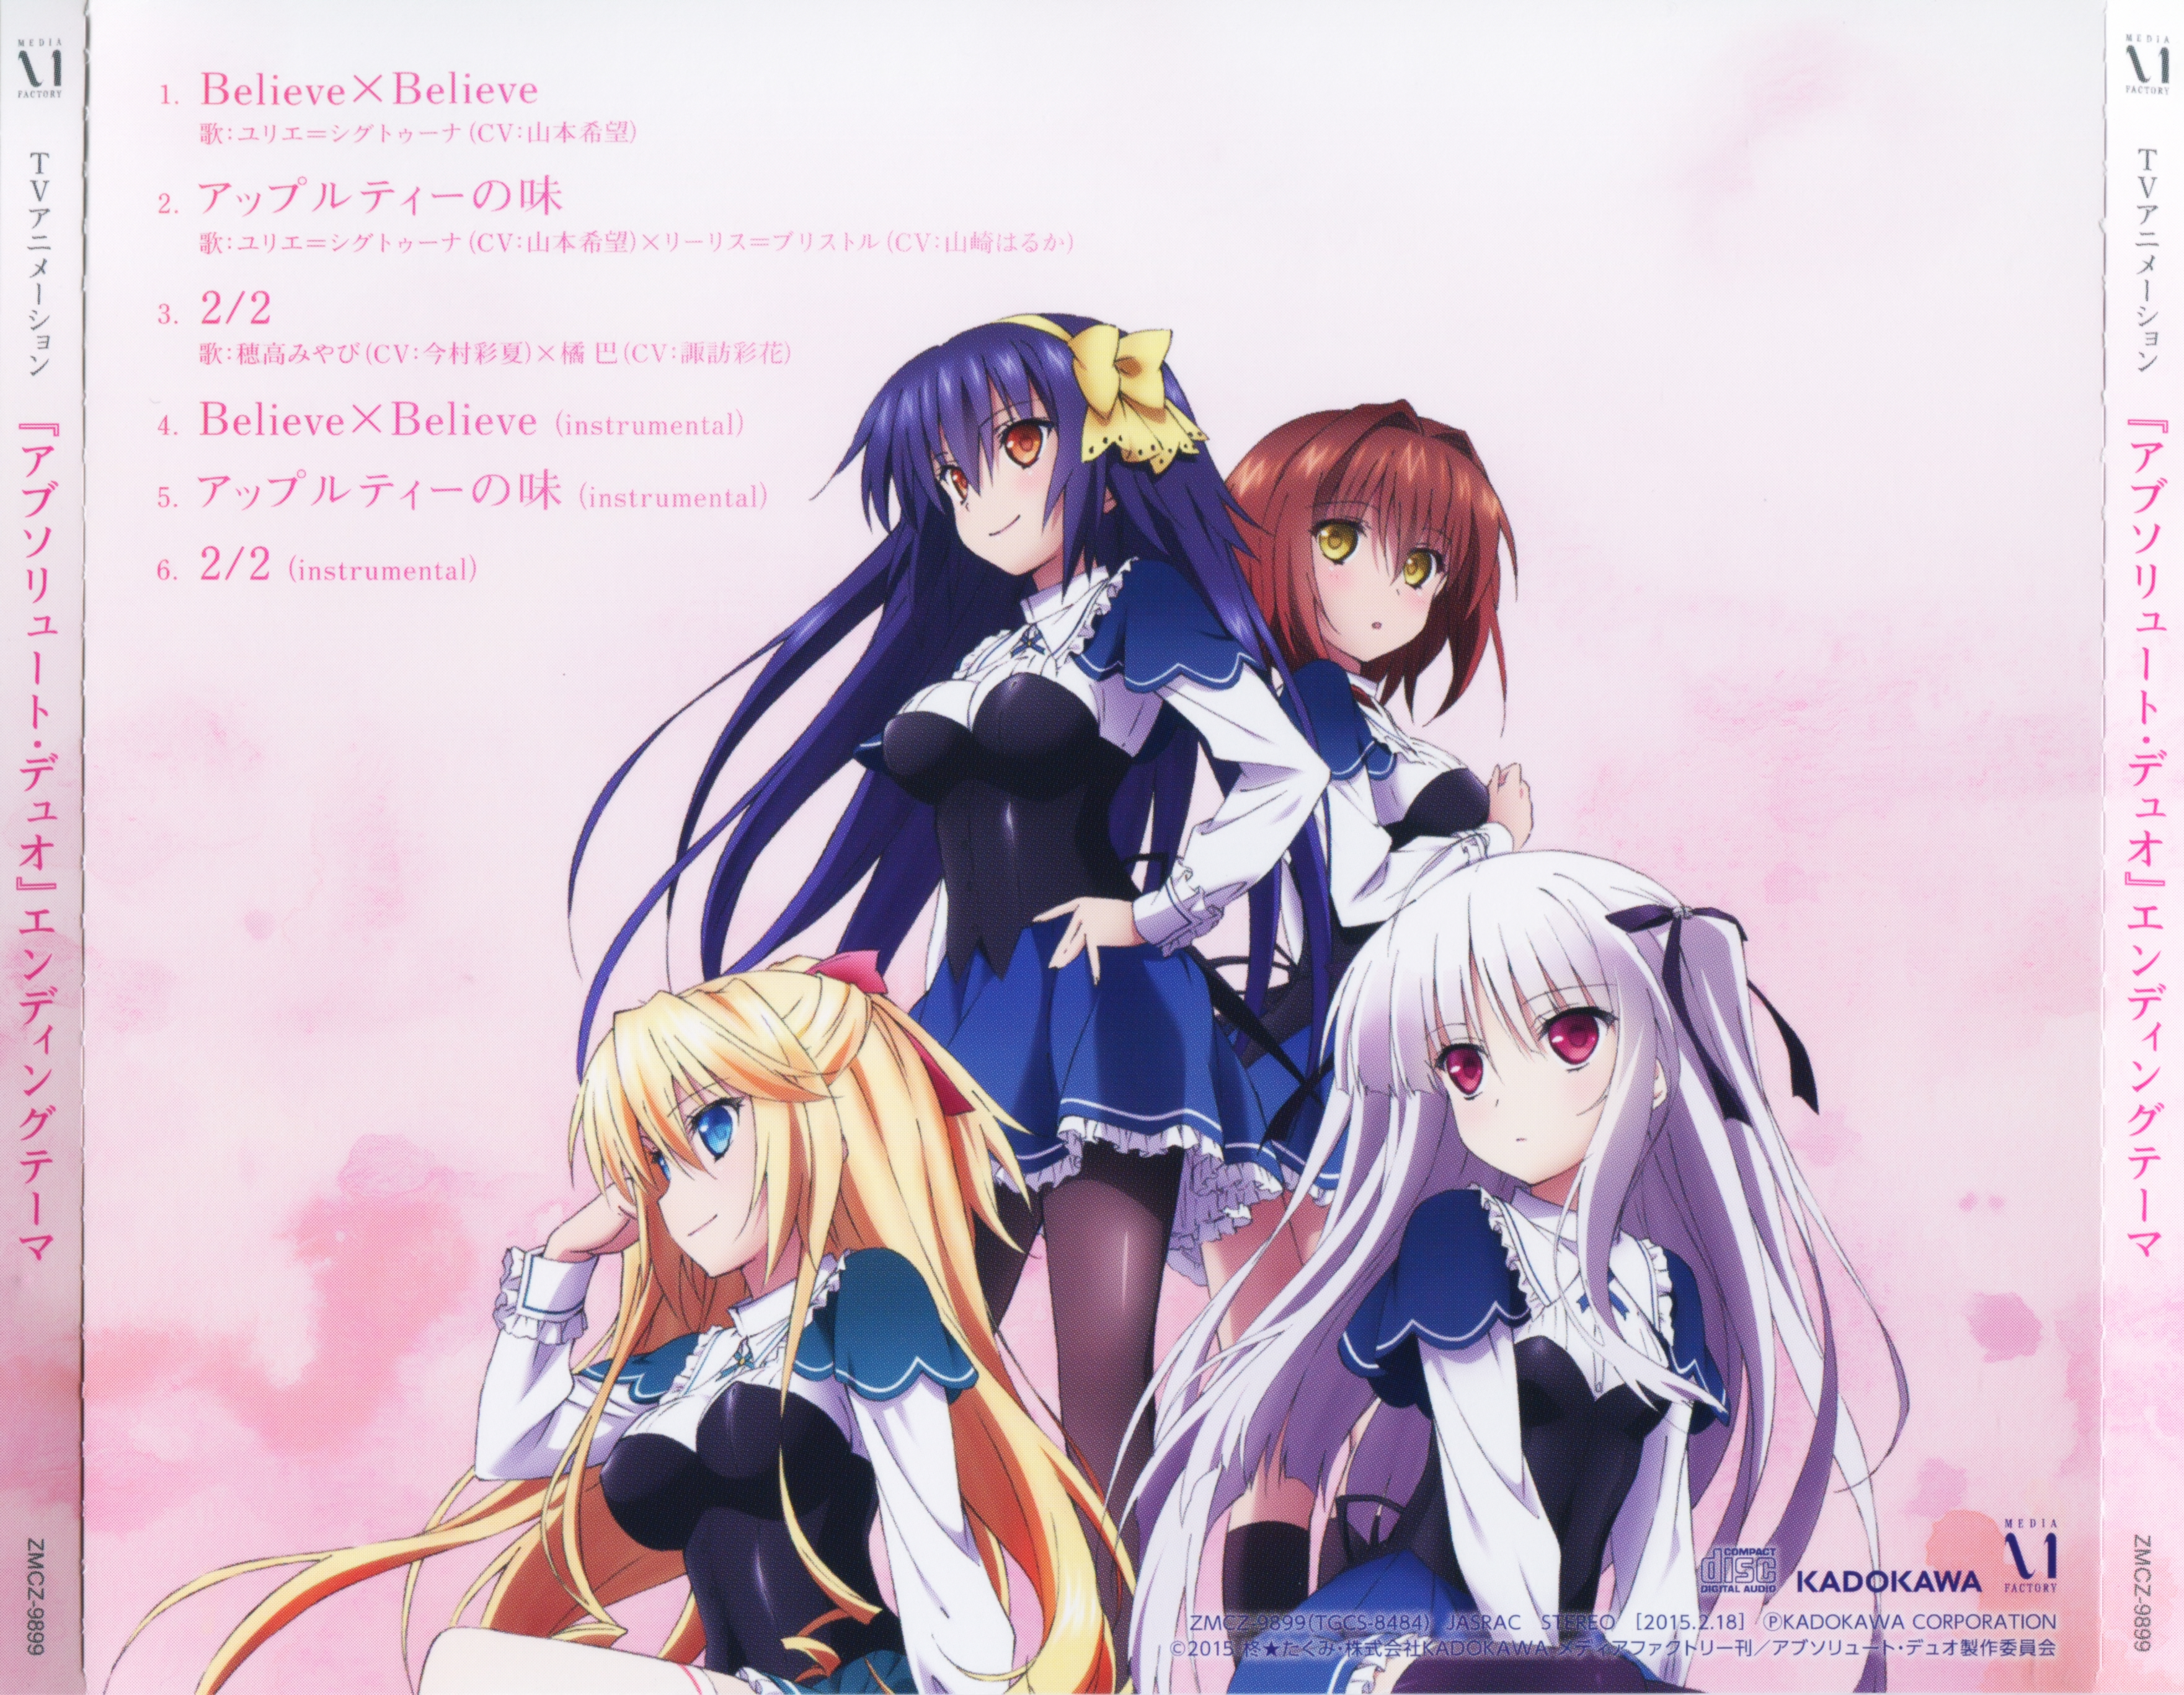 Anime Absolute Duo 4k Ultra HD Wallpaper by 清浦しよ